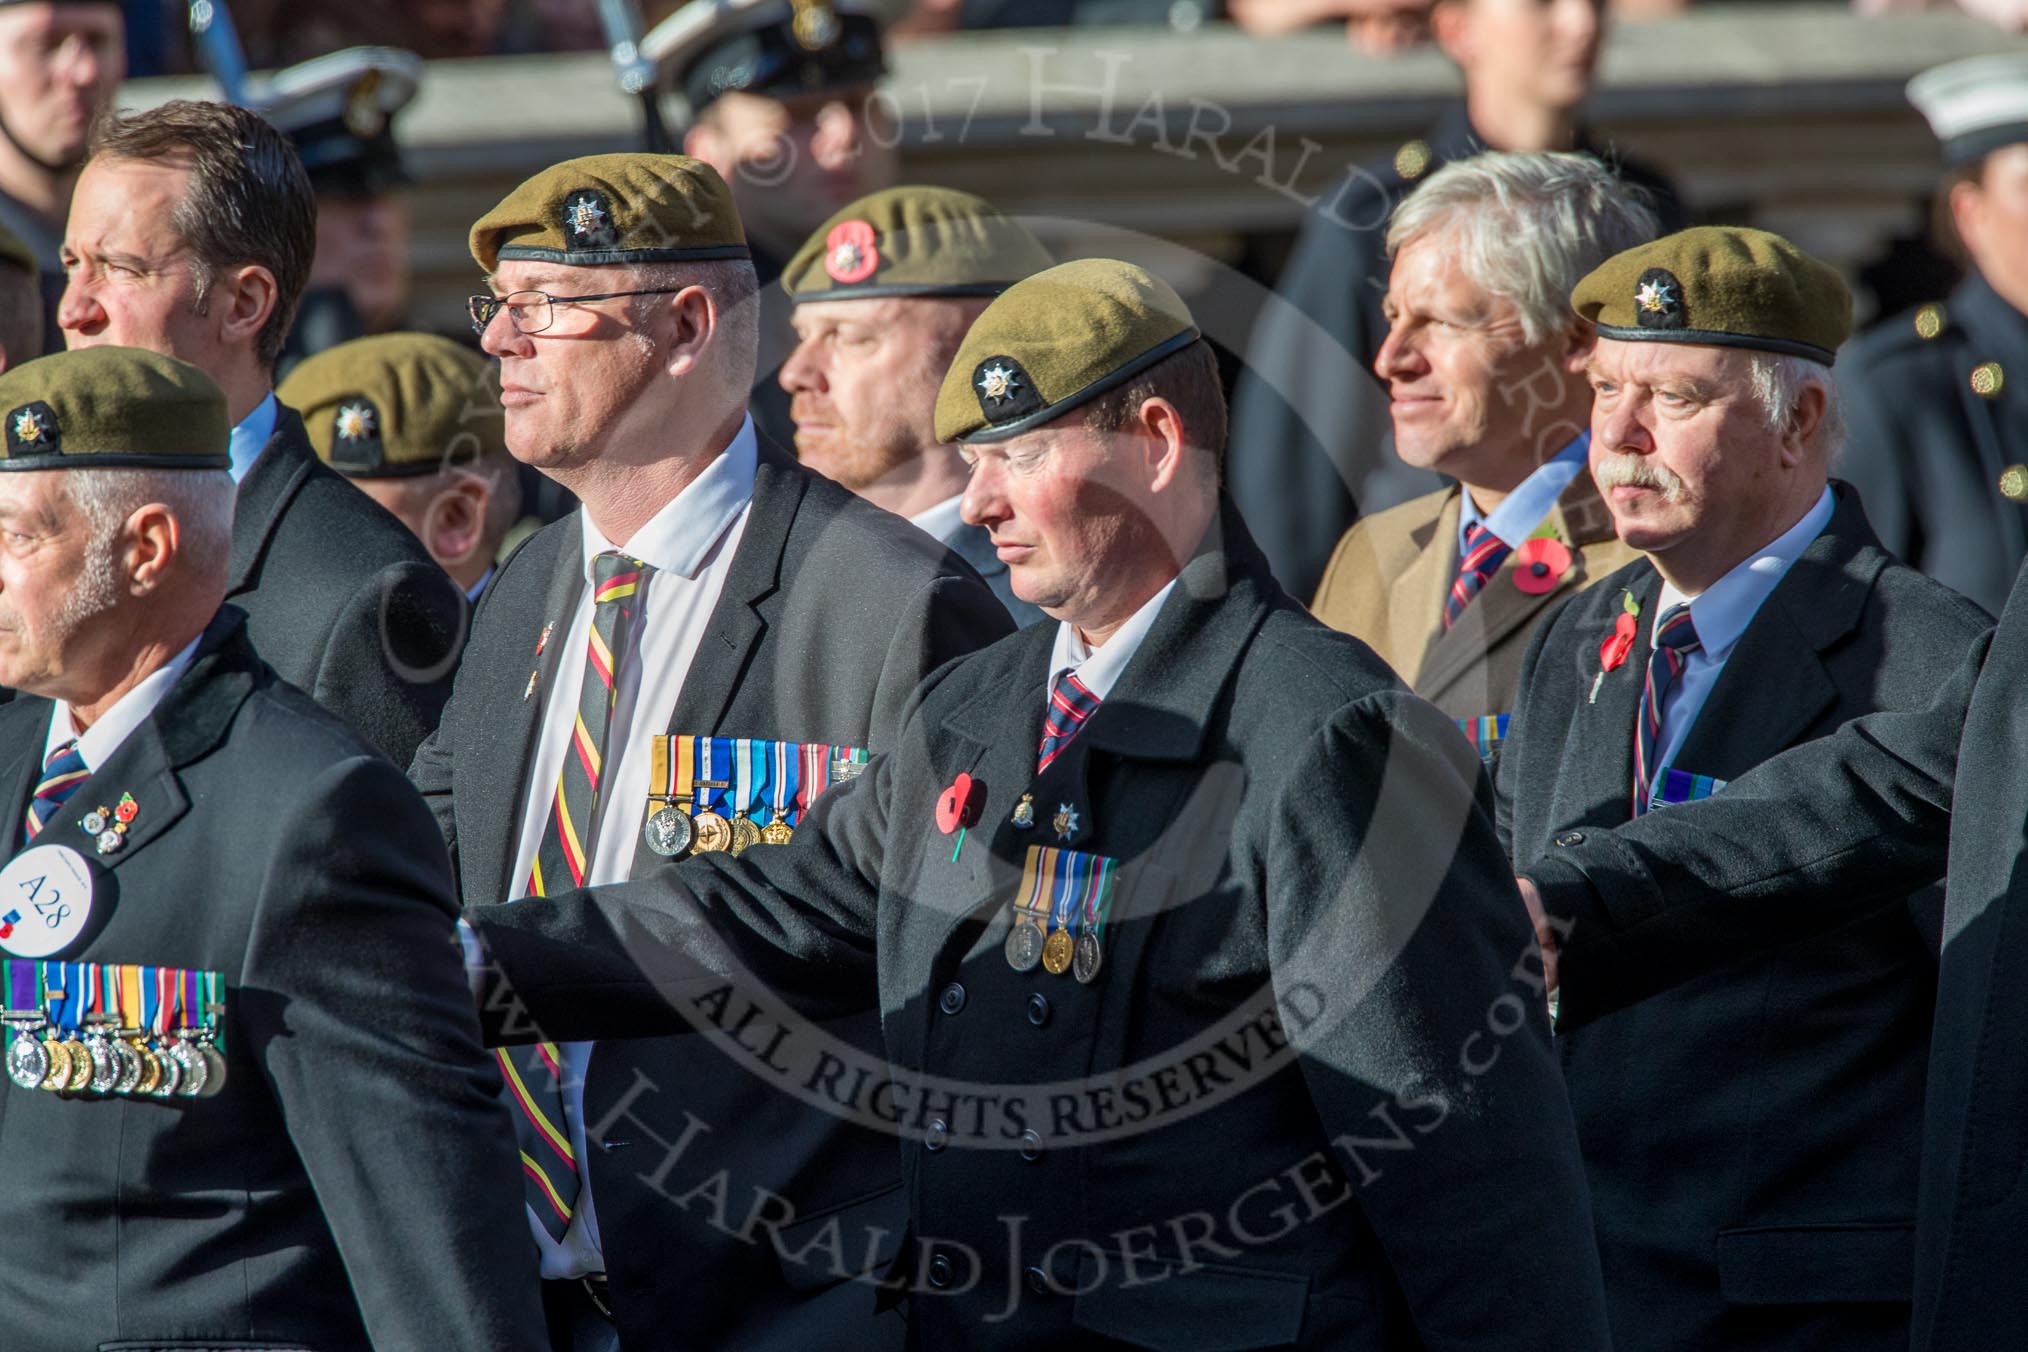 The Royal Anglian Regiment (Group A28, 21 members) during the Royal British Legion March Past on Remembrance Sunday at the Cenotaph, Whitehall, Westminster, London, 11 November 2018, 12:01.